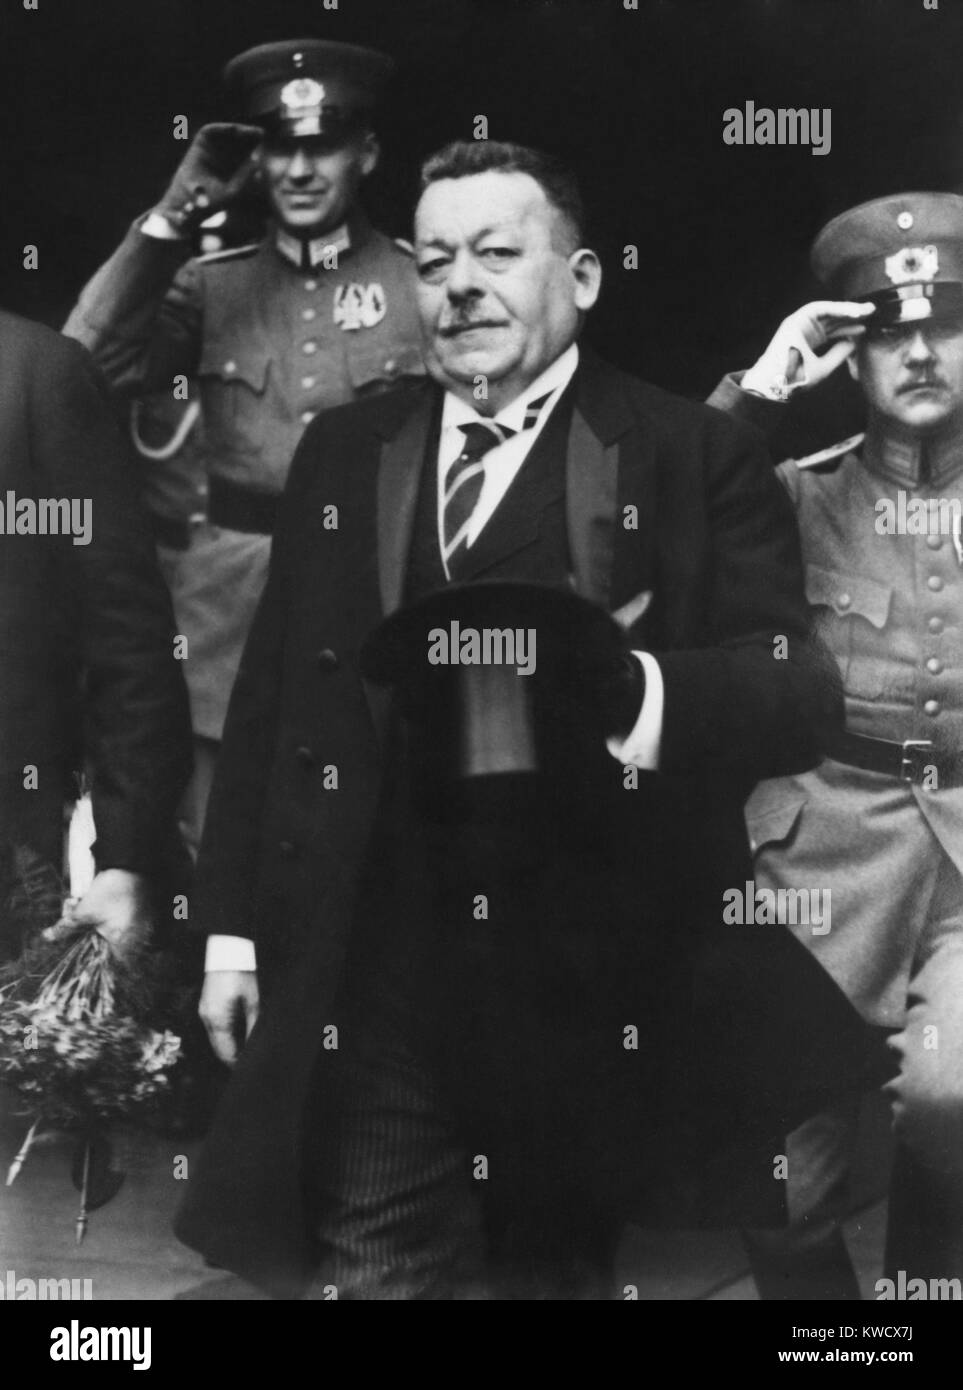 Friedrich Ebert, German politician and leader of the Social Democratic Party during WW1. After the war he played a critical role in the German Revolution and emerged as President of Germany from 1919 until his death in 1925 (BSLOC 2017 2 59) Stock Photo